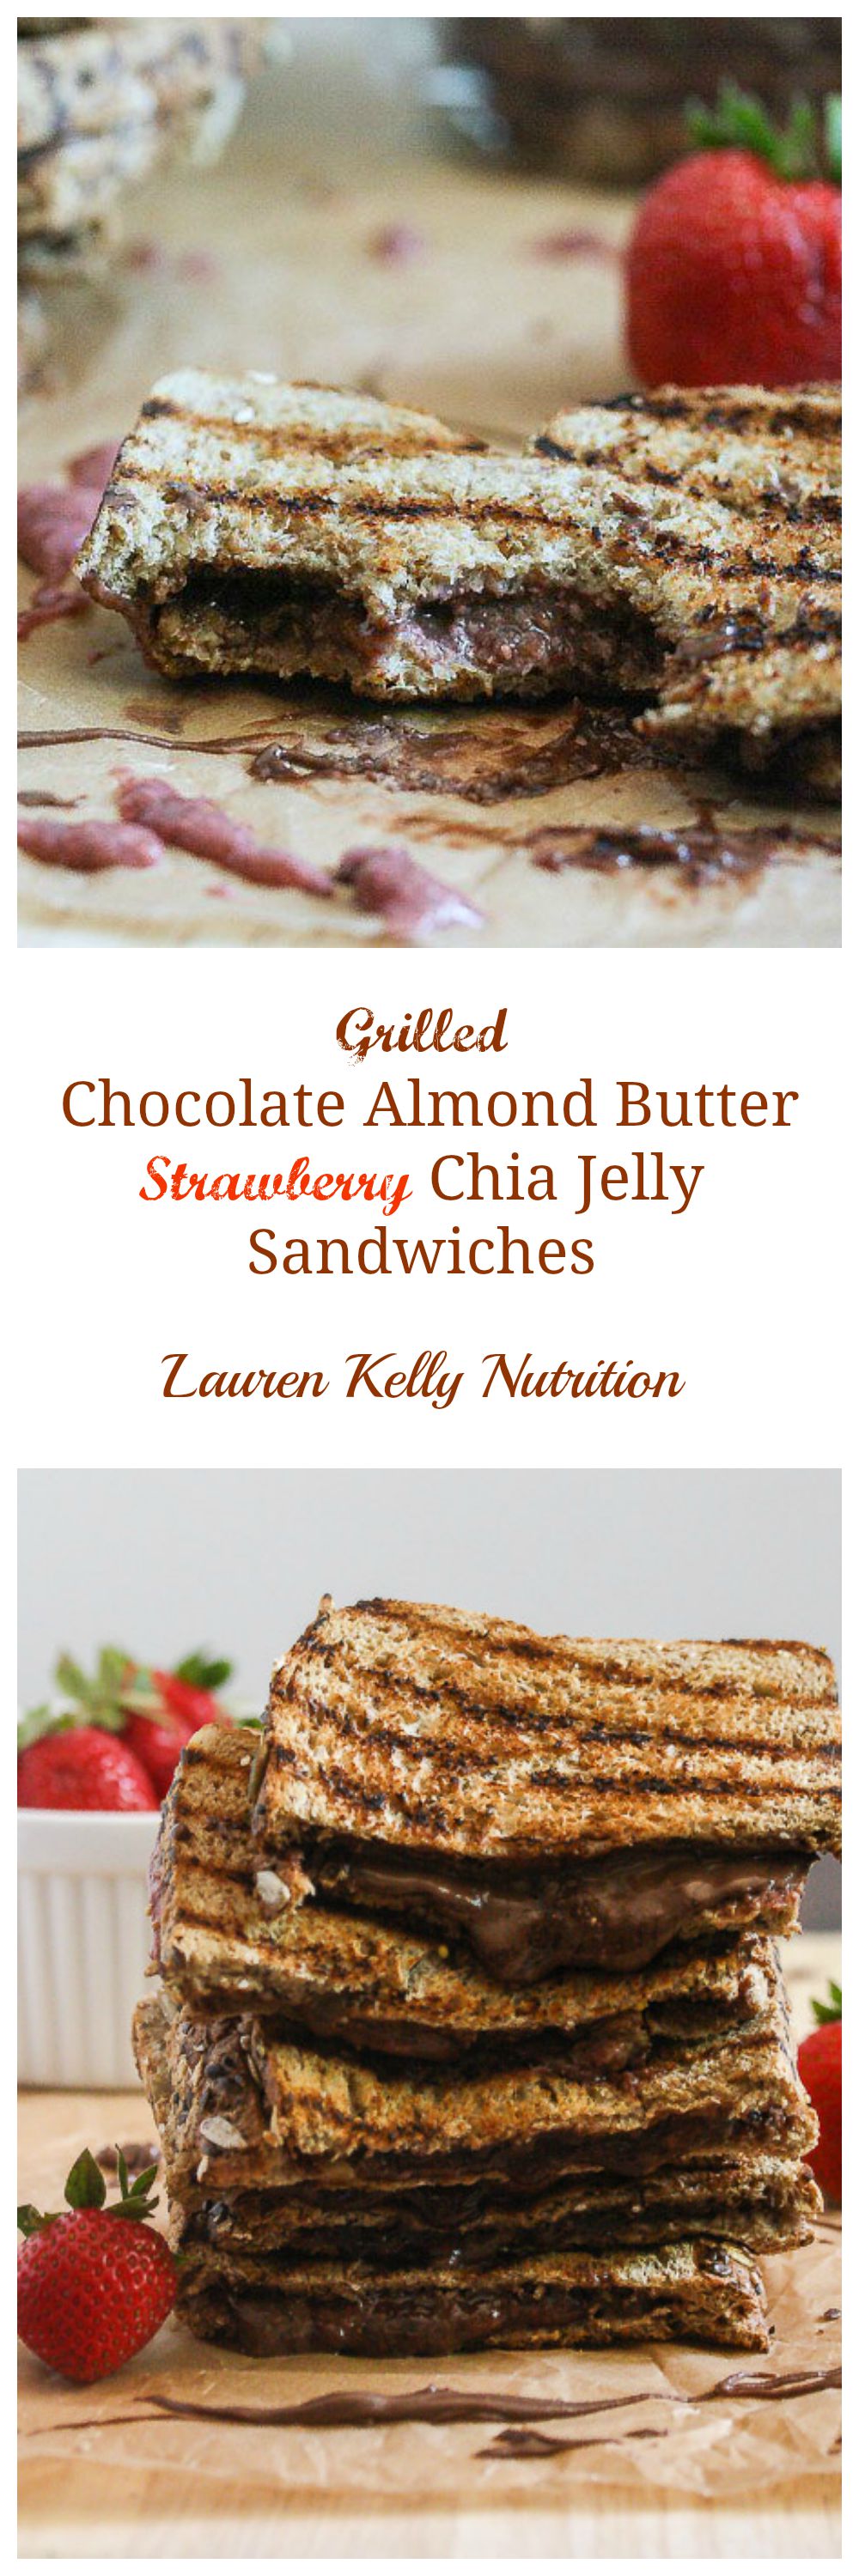 Grilled Chocolate Almond Butter & Strawberry Chia Jelly with Dave's Killer Bread @killerbreadman